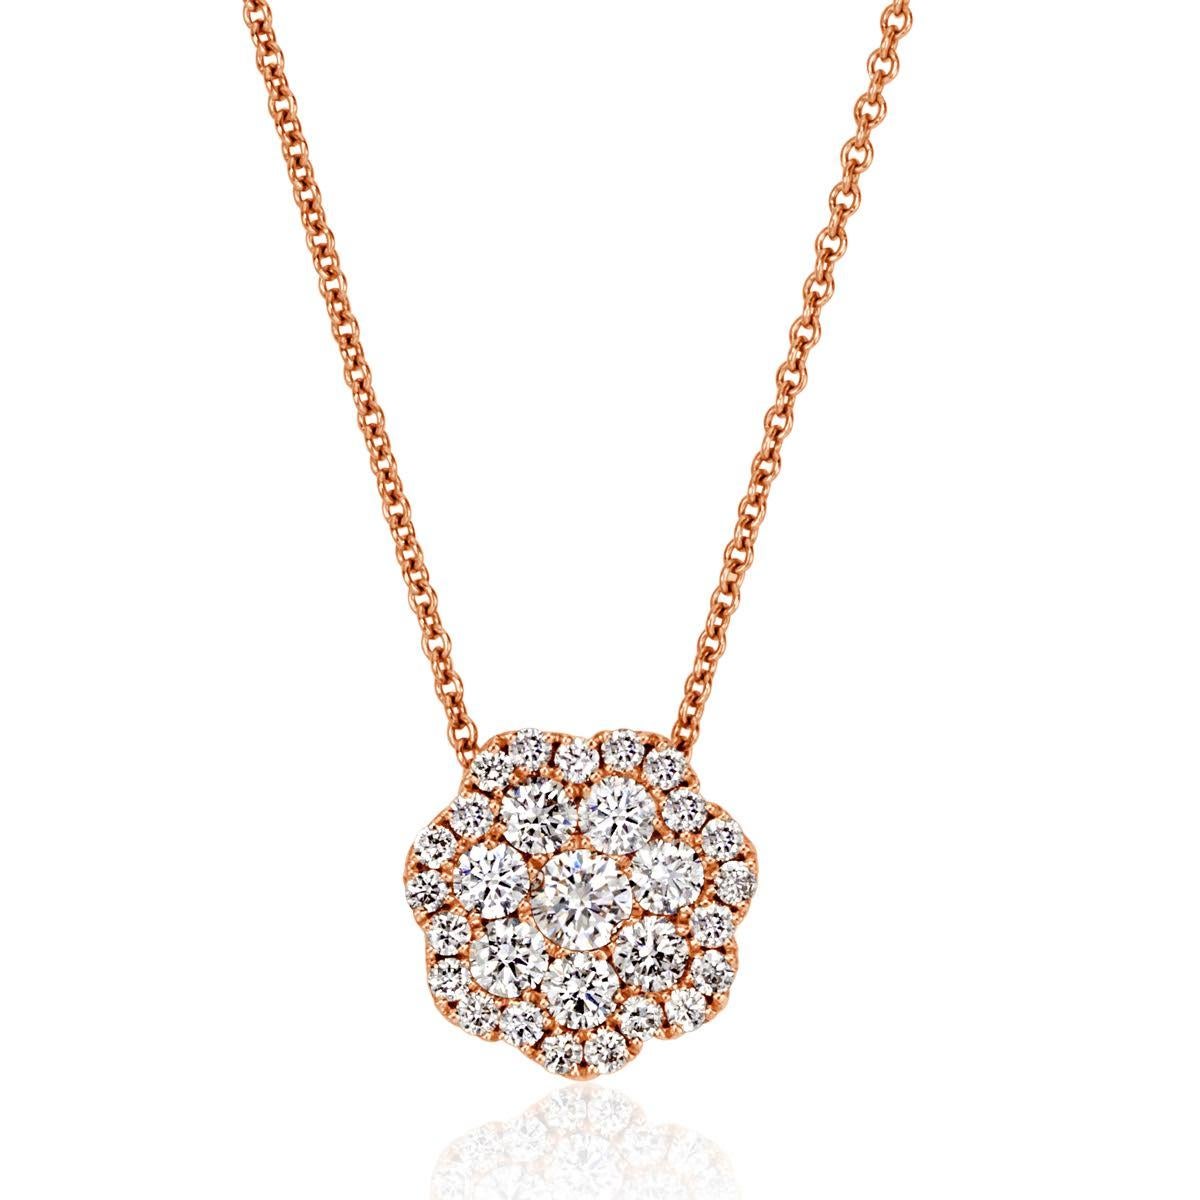 Handcrafted in 14k rose gold, this ravishing diamond pendant features 0.51ct of round brilliant cut diamonds arranged in a charming floral pattern. Each of the diamonds are matched and graded at E-F in color and VS1-VS2 in clarity. It is stunning